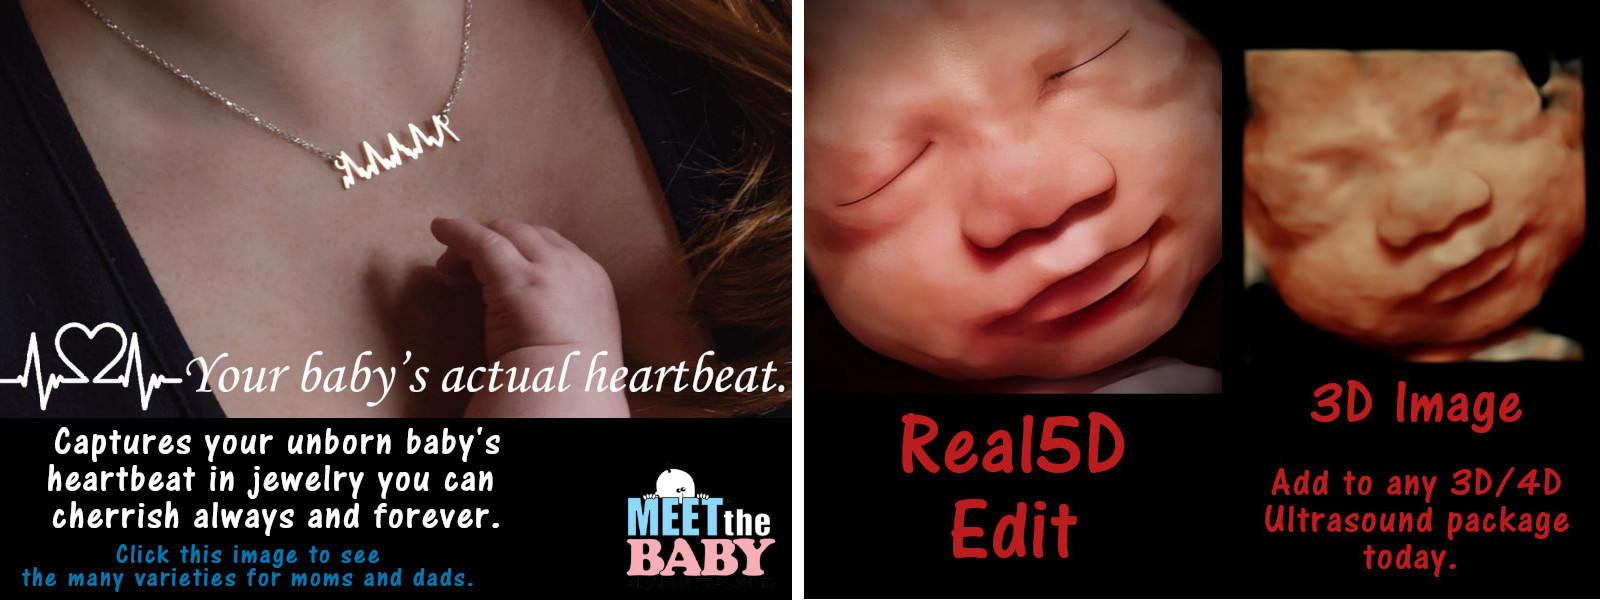 Heartbeat jewelry and real5D image